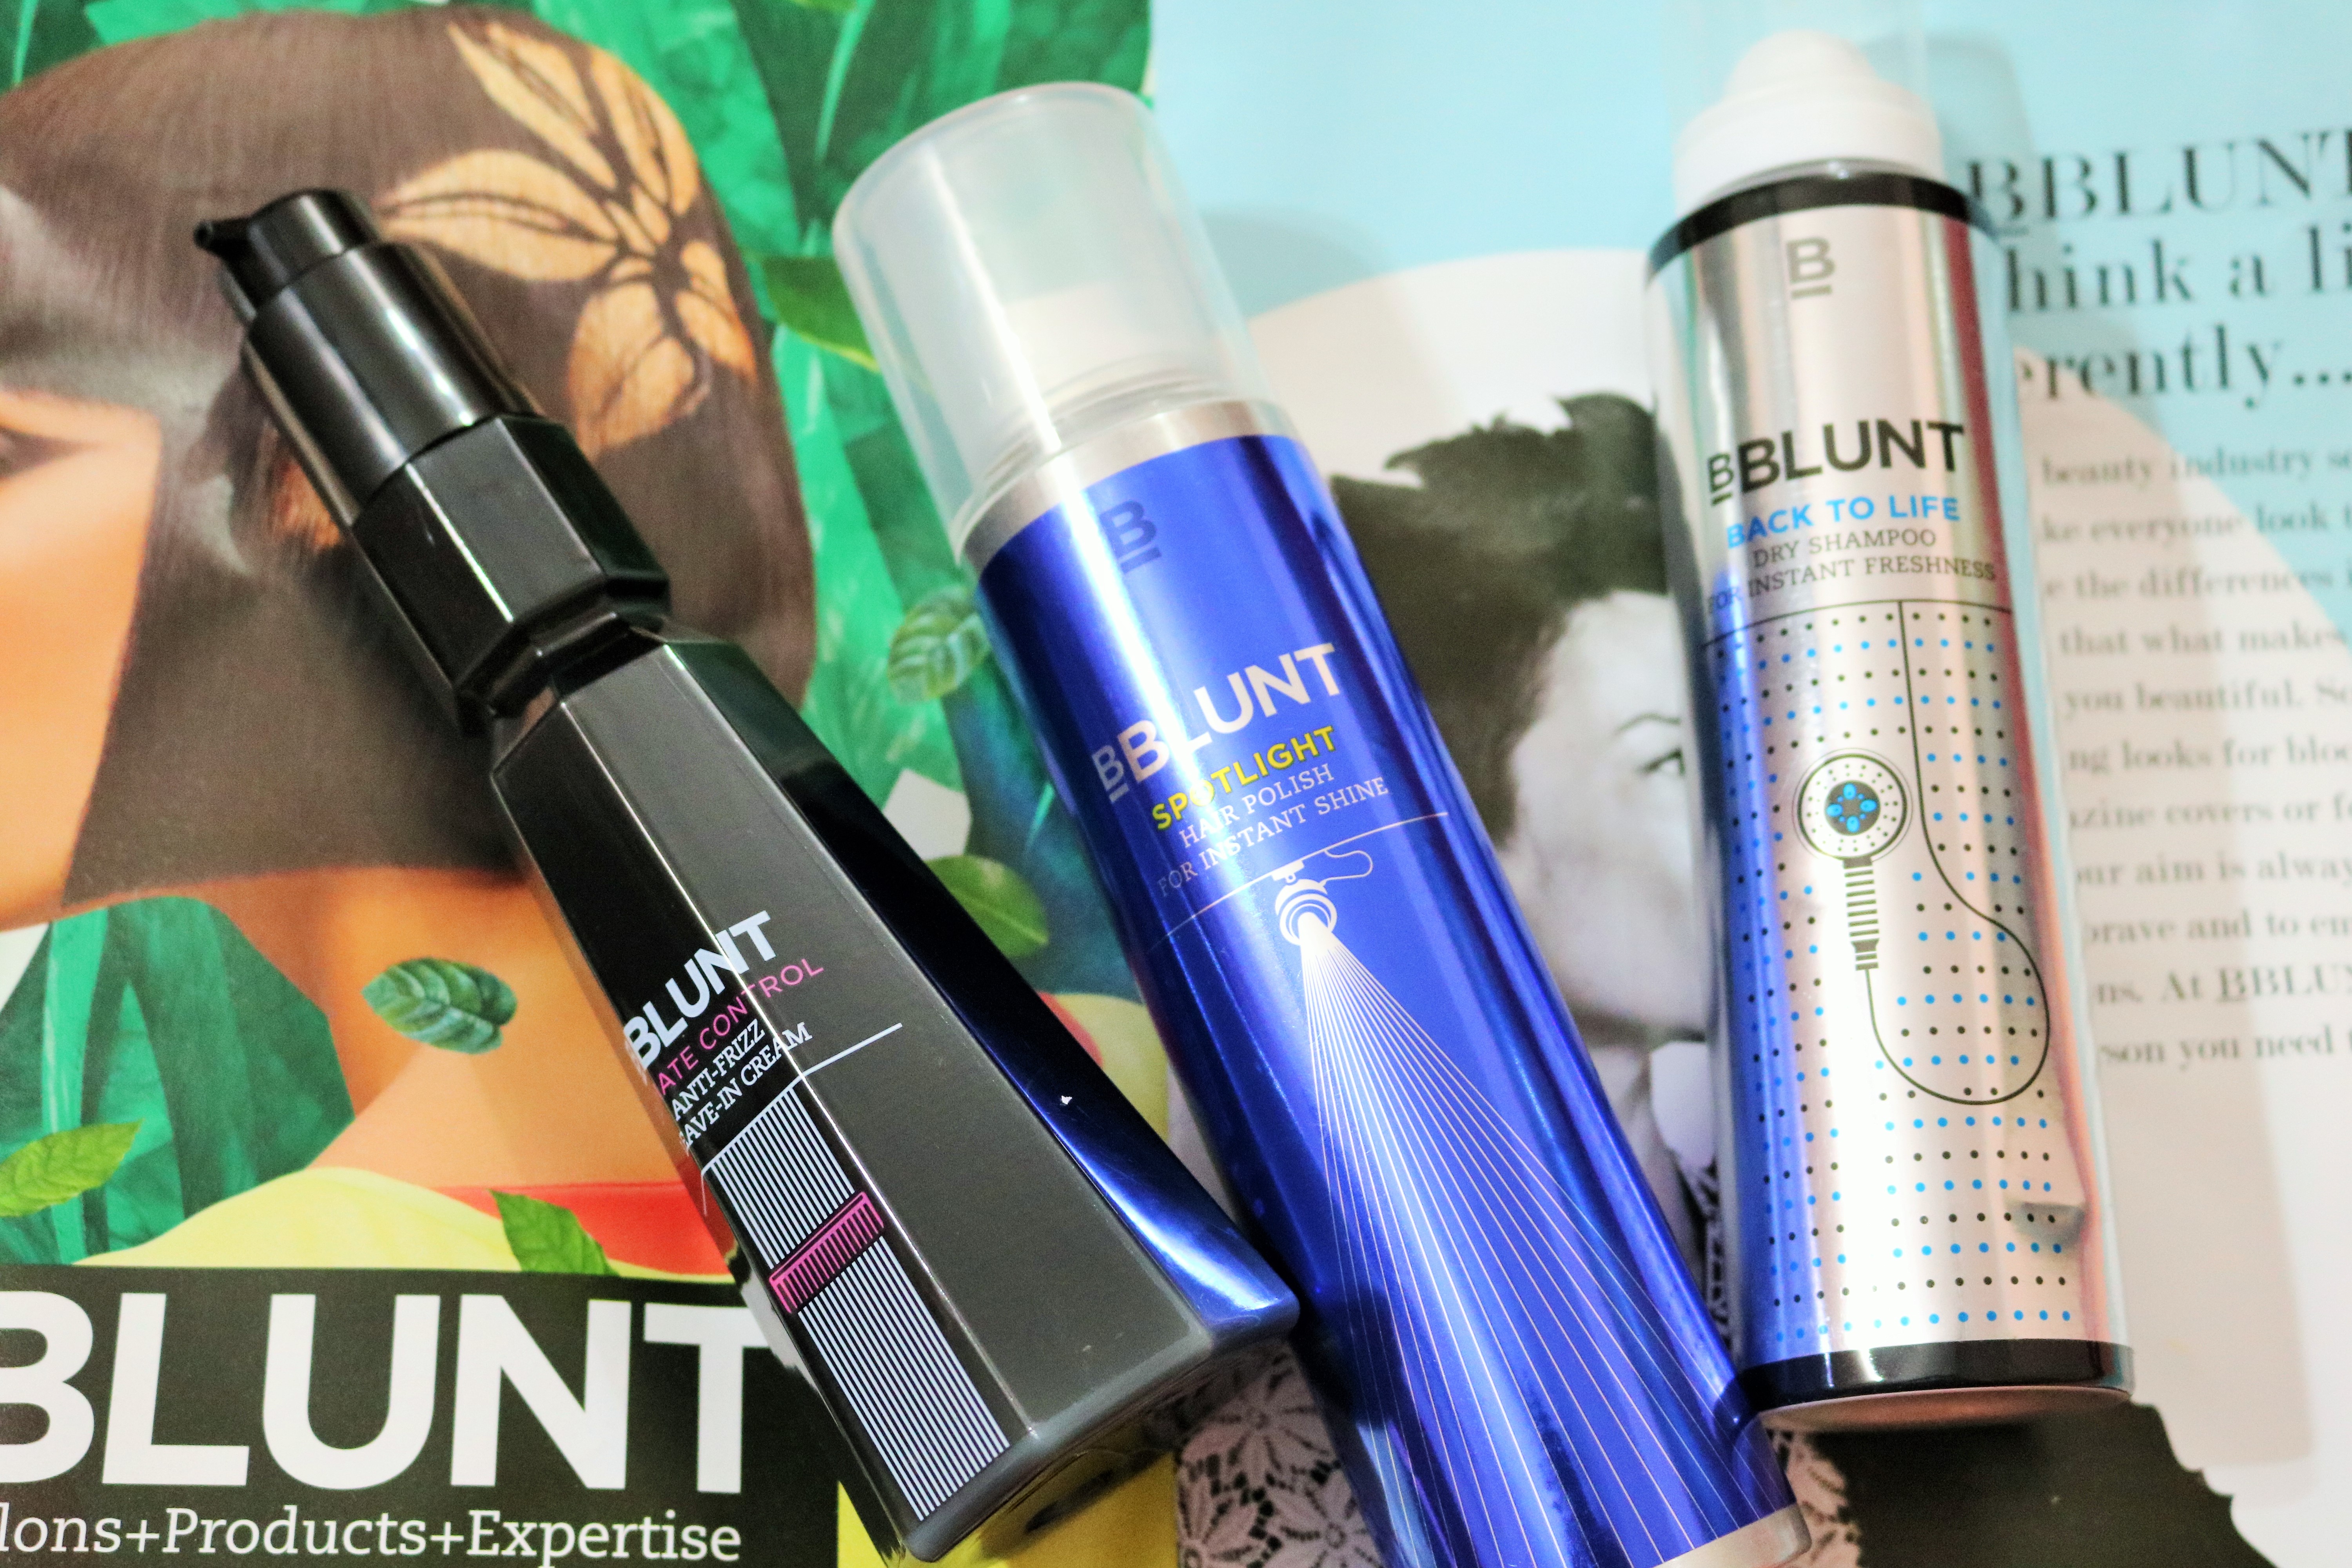 BBlunt ANTI-FRIZZ LEAVE-IN CREAM, DRY SHAMPOO AND HAIR POLISH - Review -  Pout Pretty